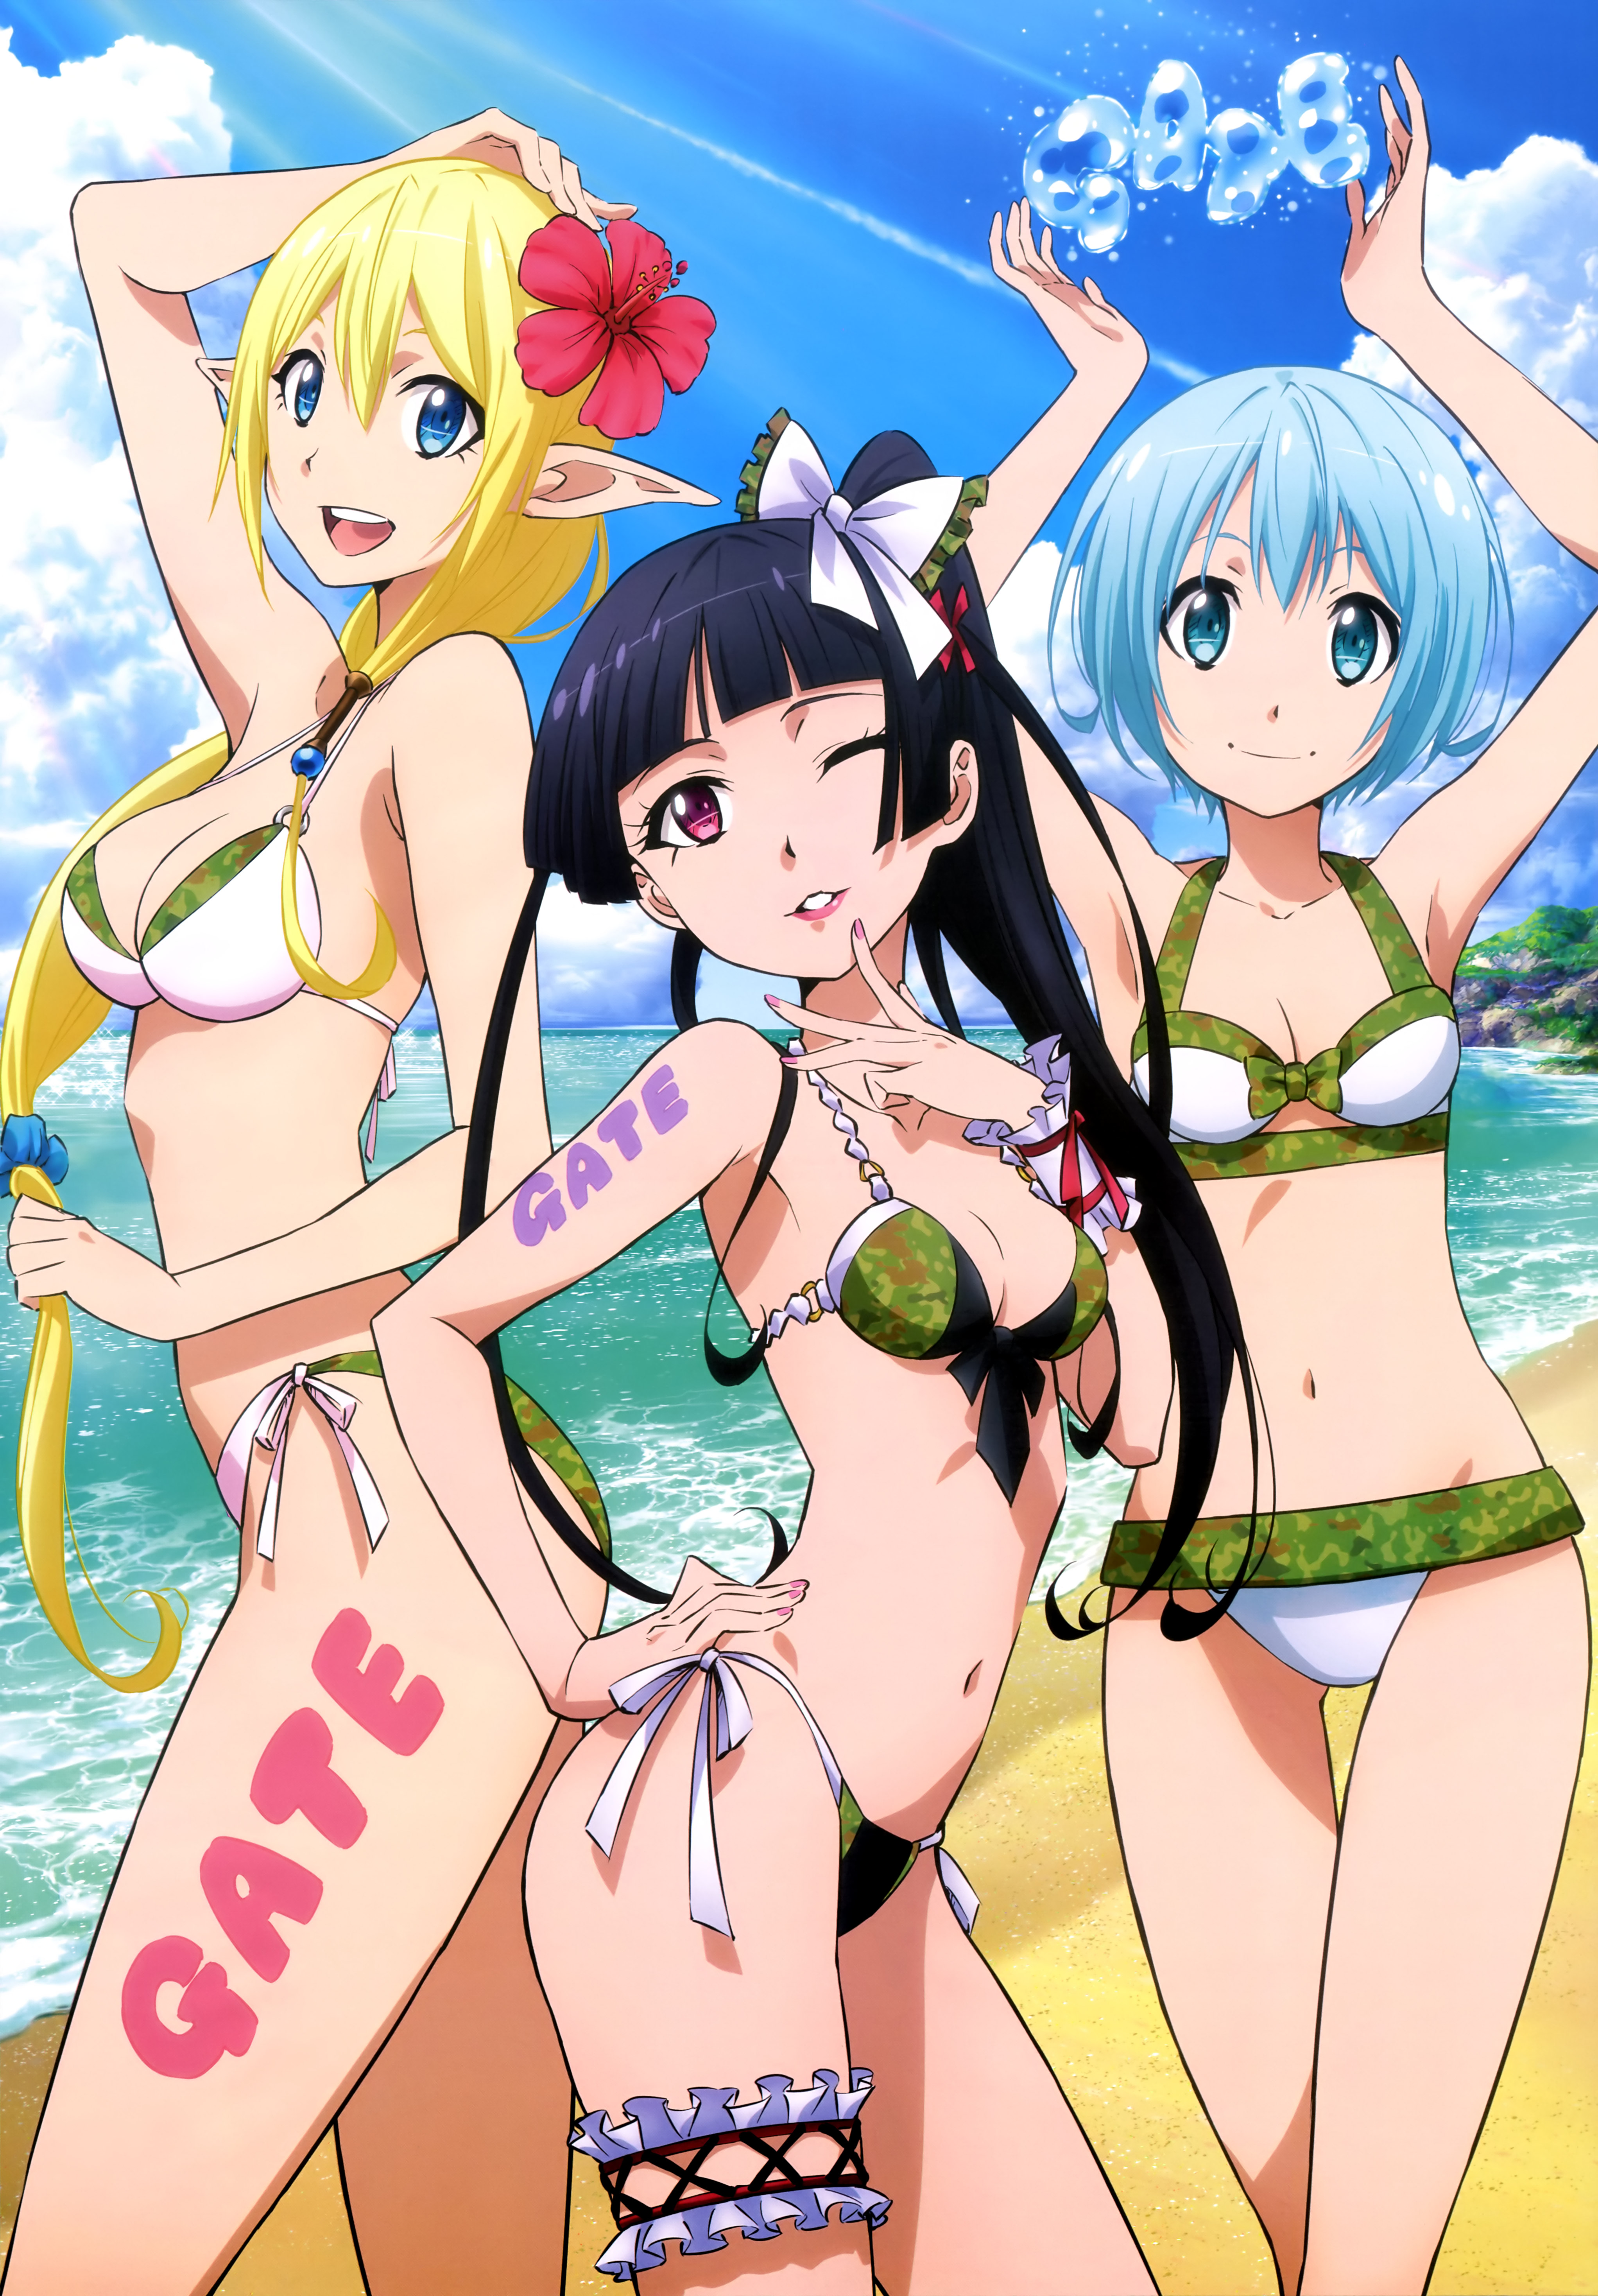 NyanType-Magazine-March-2016-anime-poster-GATE-0003